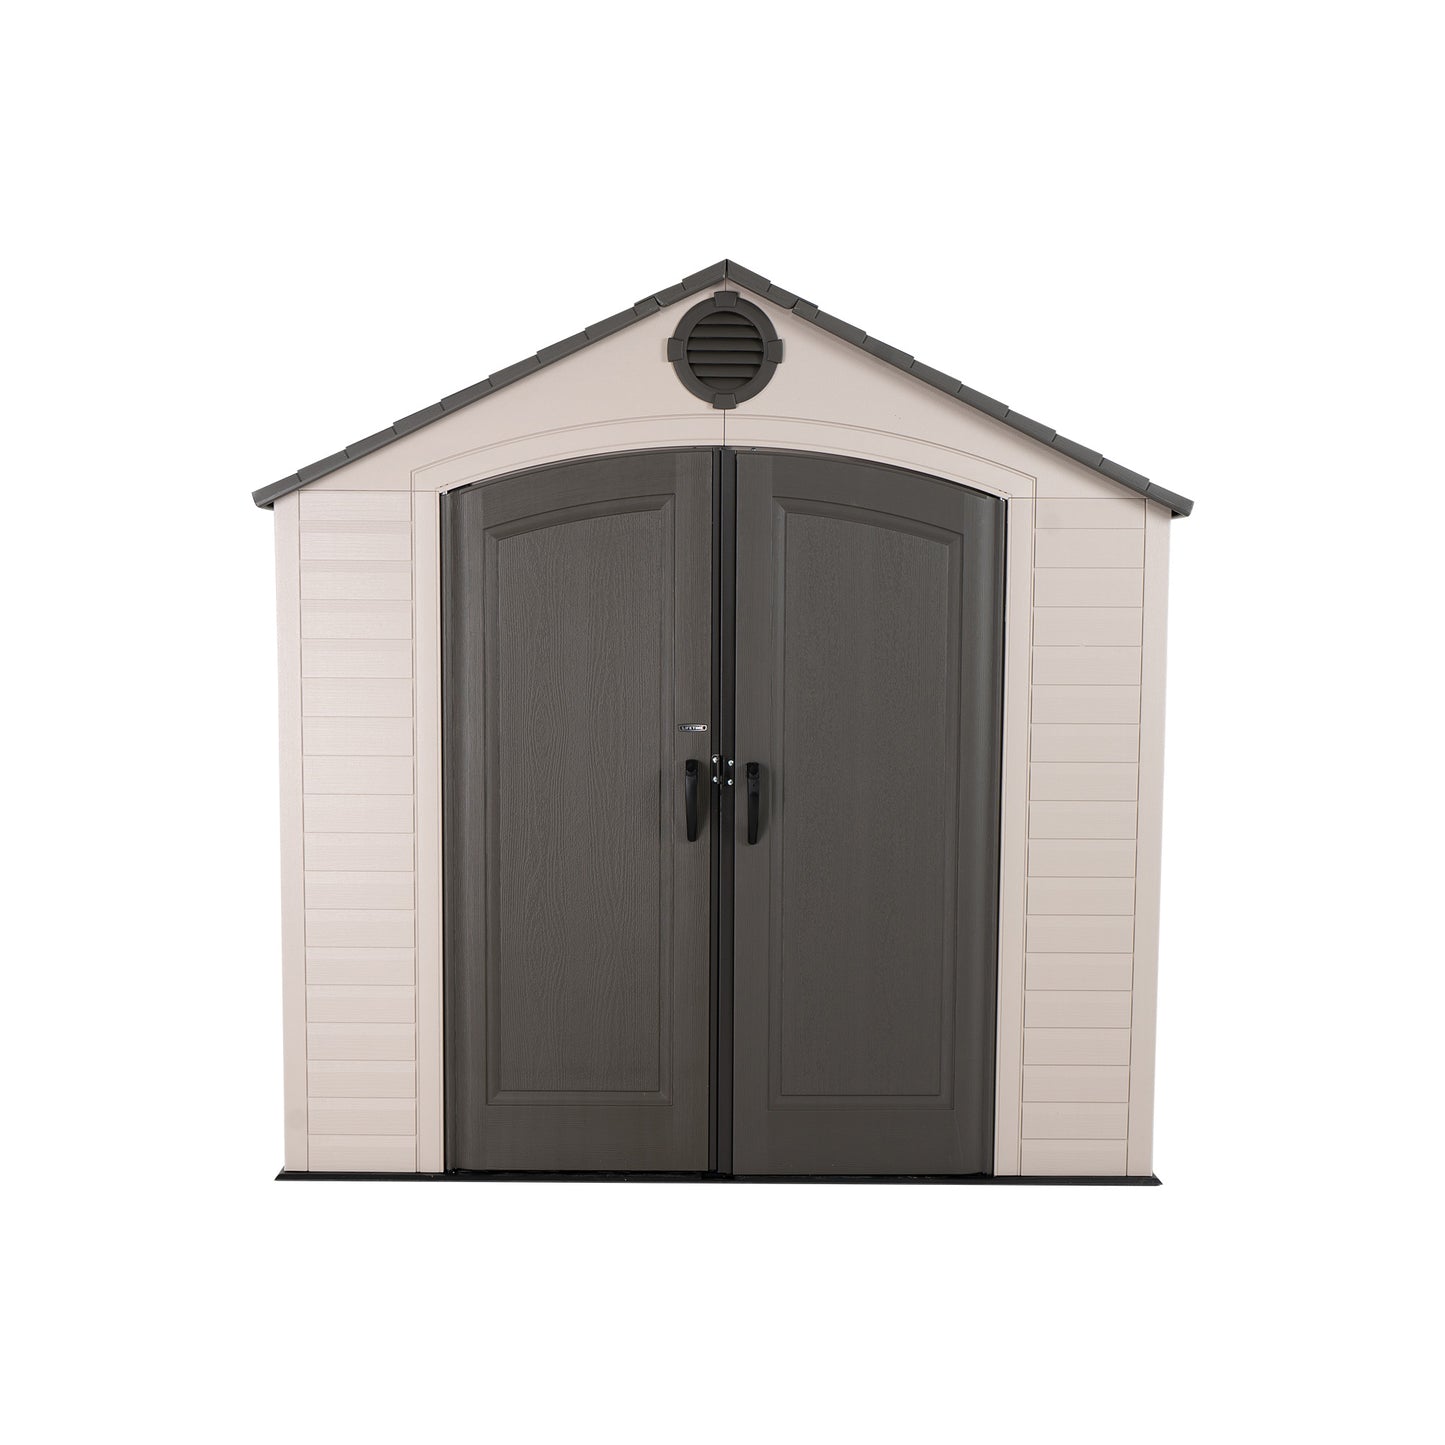 Lifetime 8 x 13' Outdoor Storage Shed - Light Grey